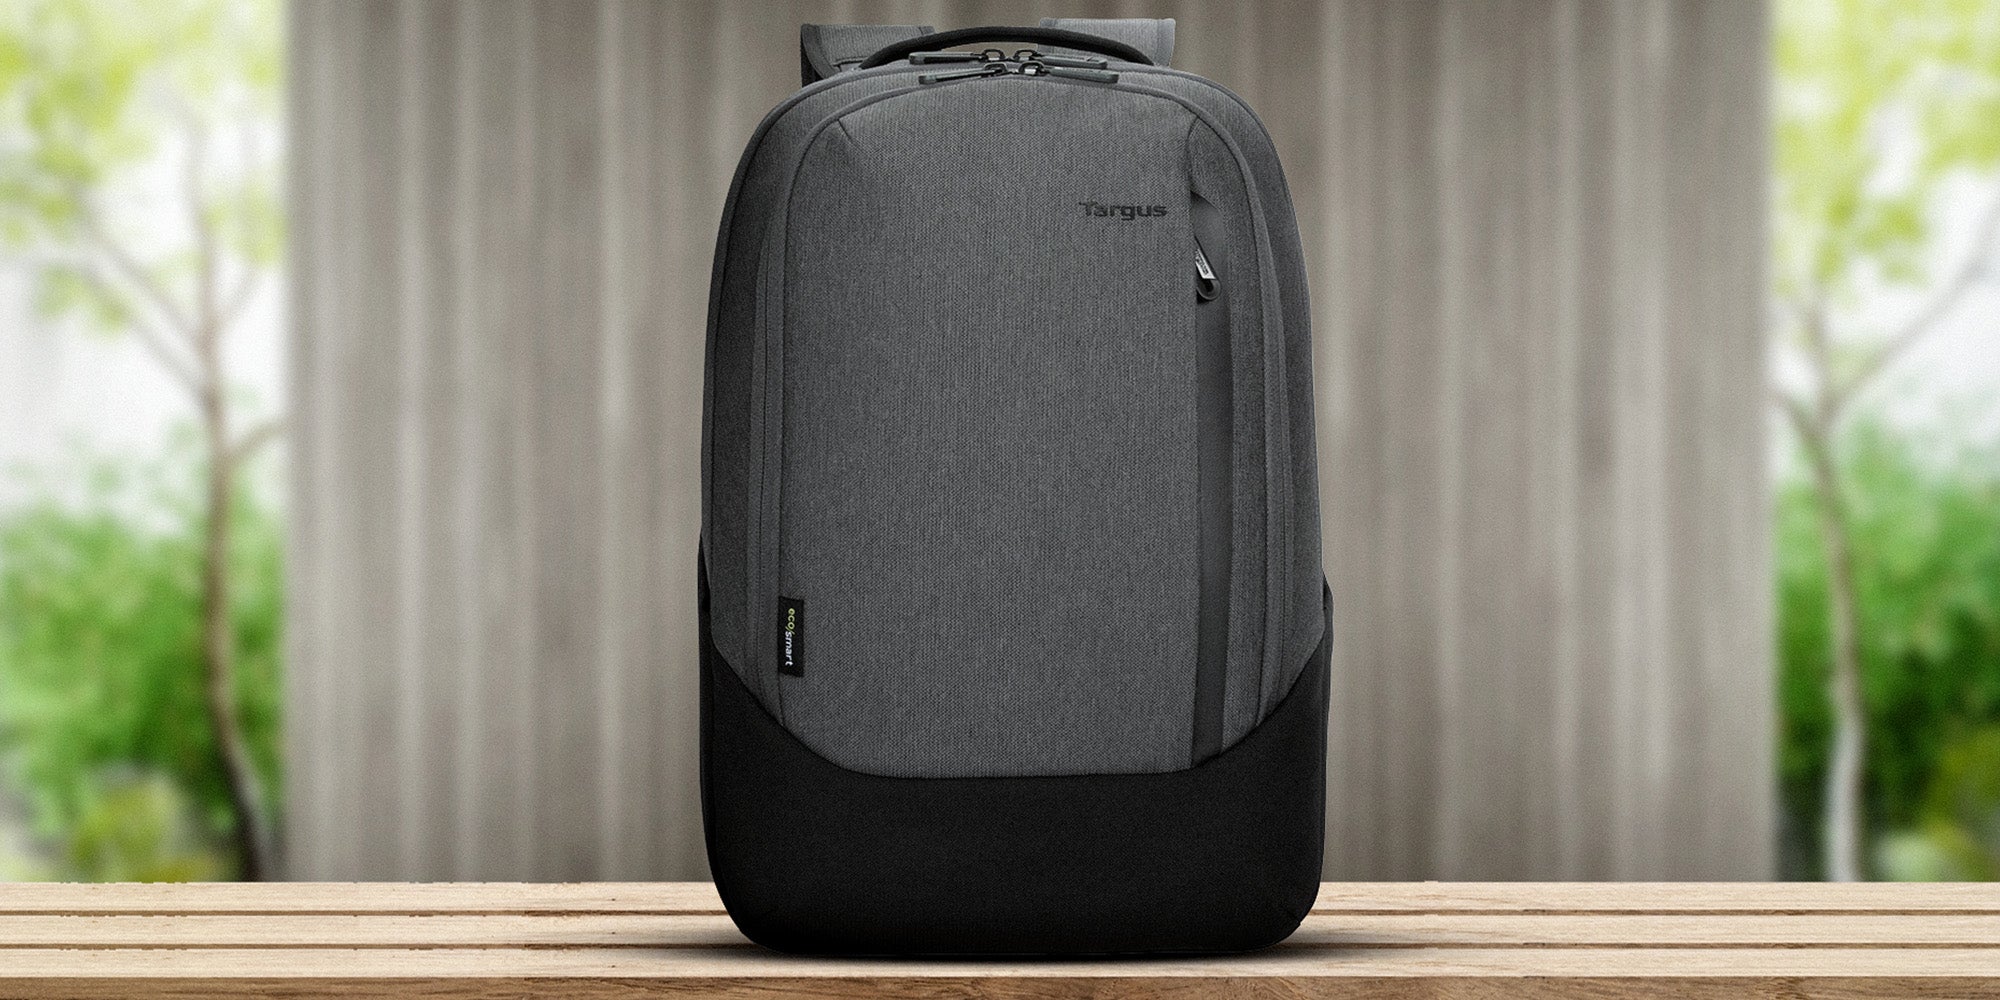 Targus Launches Eco-Friendly Backpack with Built-In Find My Locator to